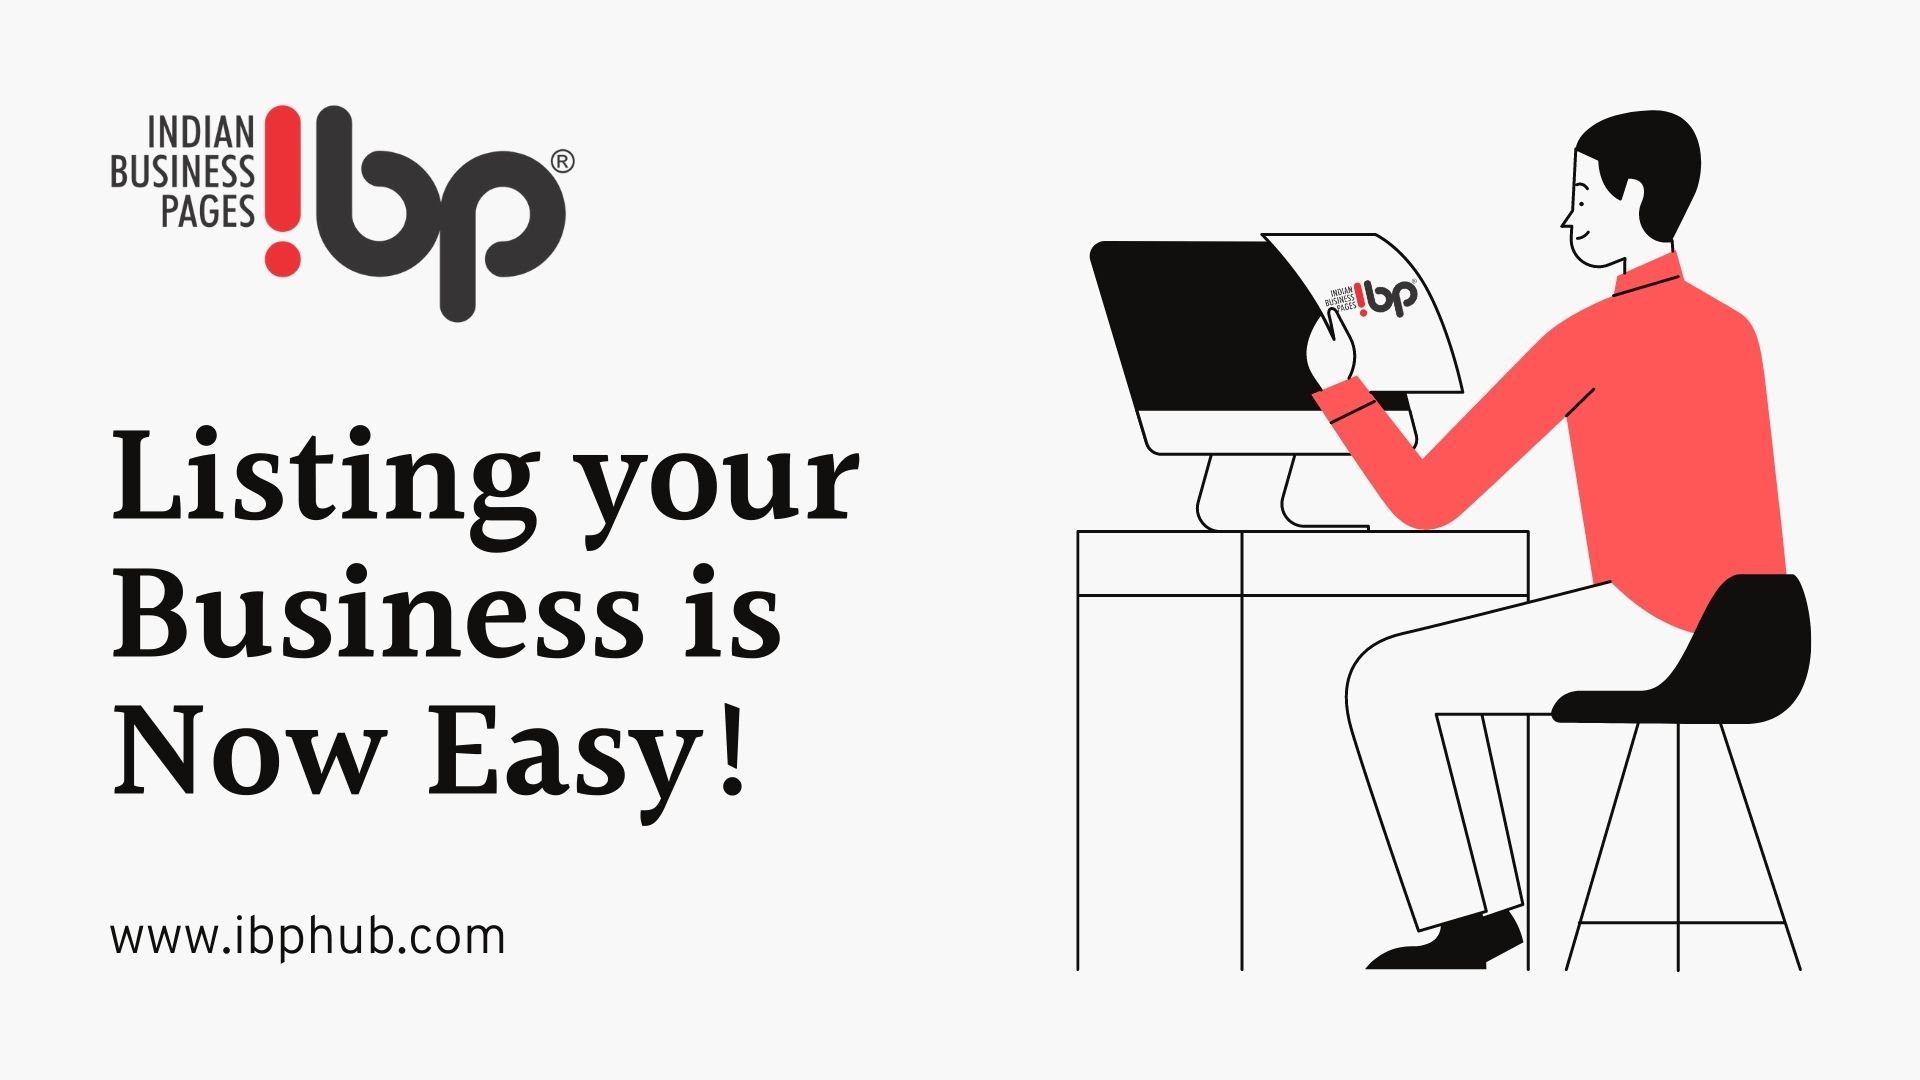 Listing your Business is Now Easy